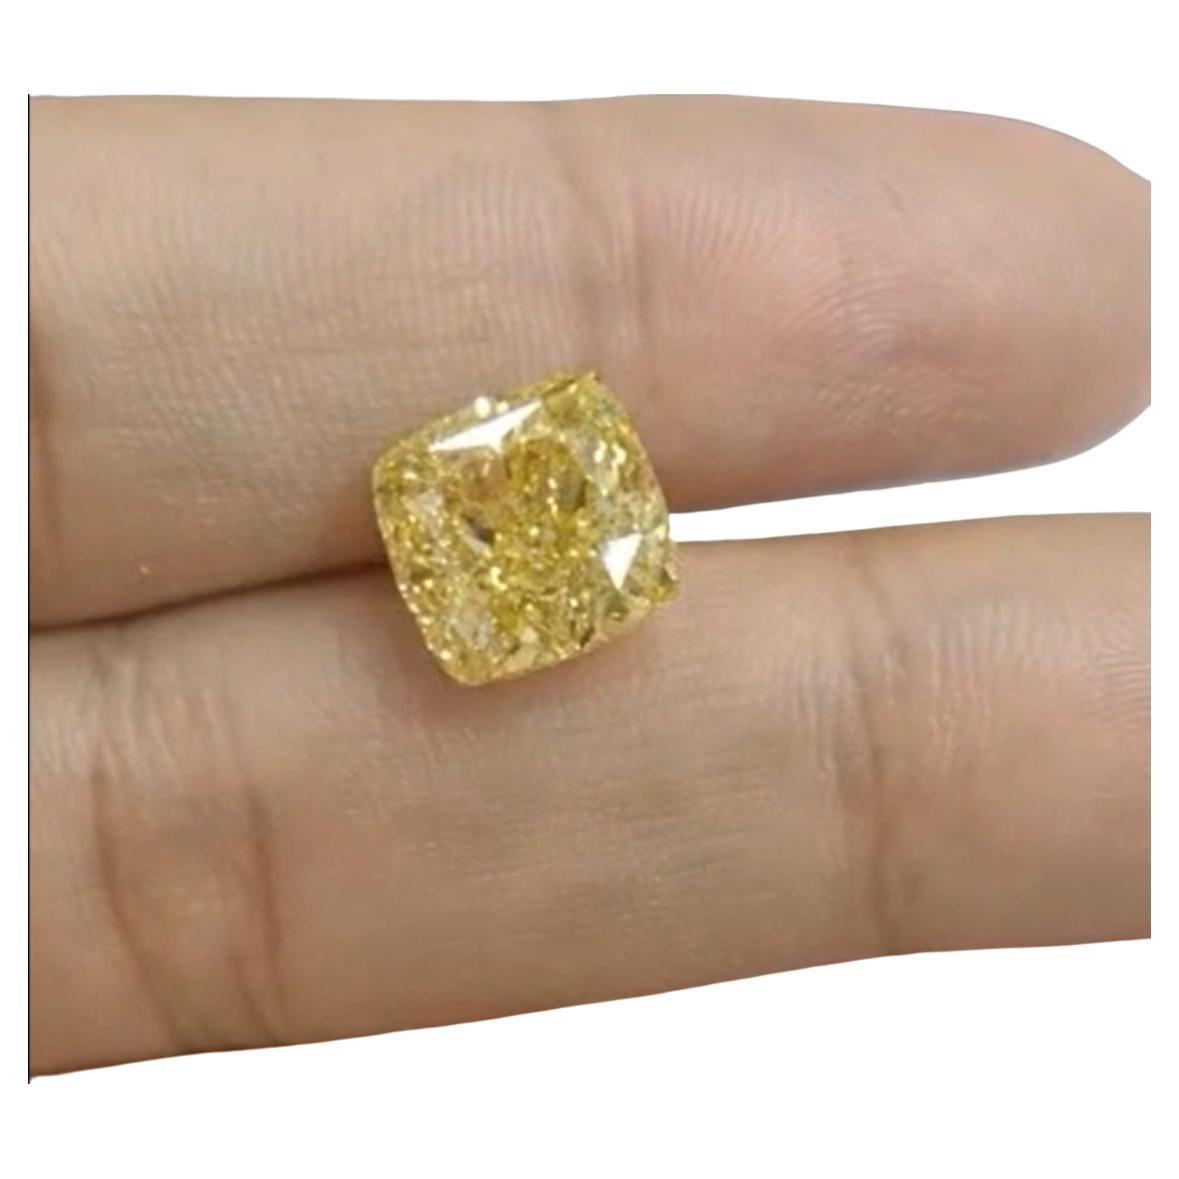 Fantastic 7.55 Carat Natural Diamond Cushion Shape.
Certified by the GIA as Fancy Vivid Yellow is a fantastic investment grade diamond of 7.55 Carat weight internally flawless in clarity excellent polish, excellent simmetry and none fluorescence.